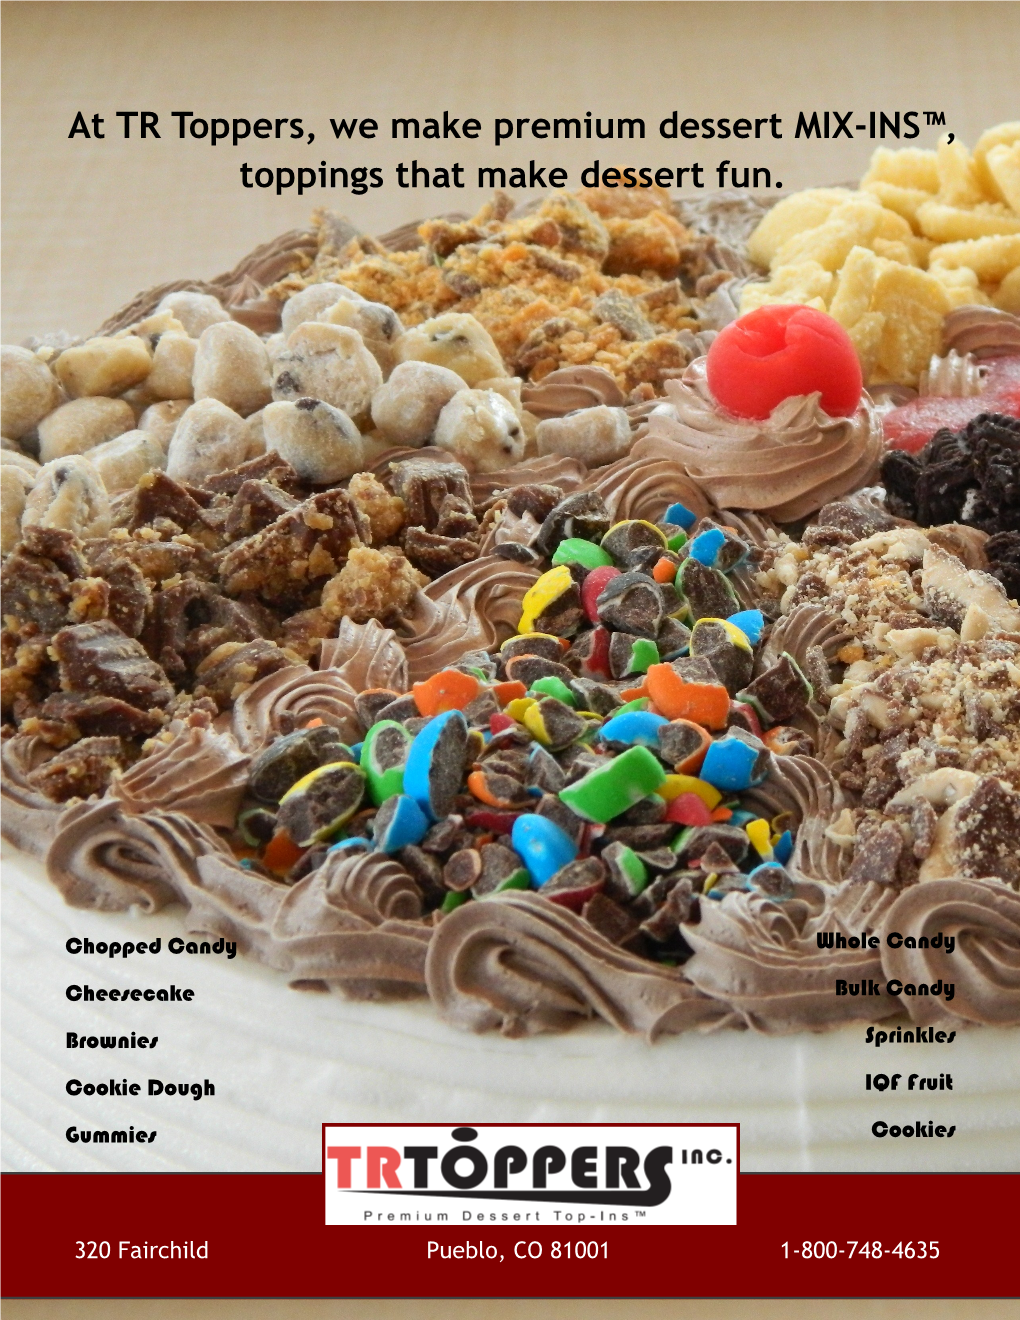 At TR Toppers, We Make Premium Dessert MIX-INS™, Toppings That Make Dessert Fun